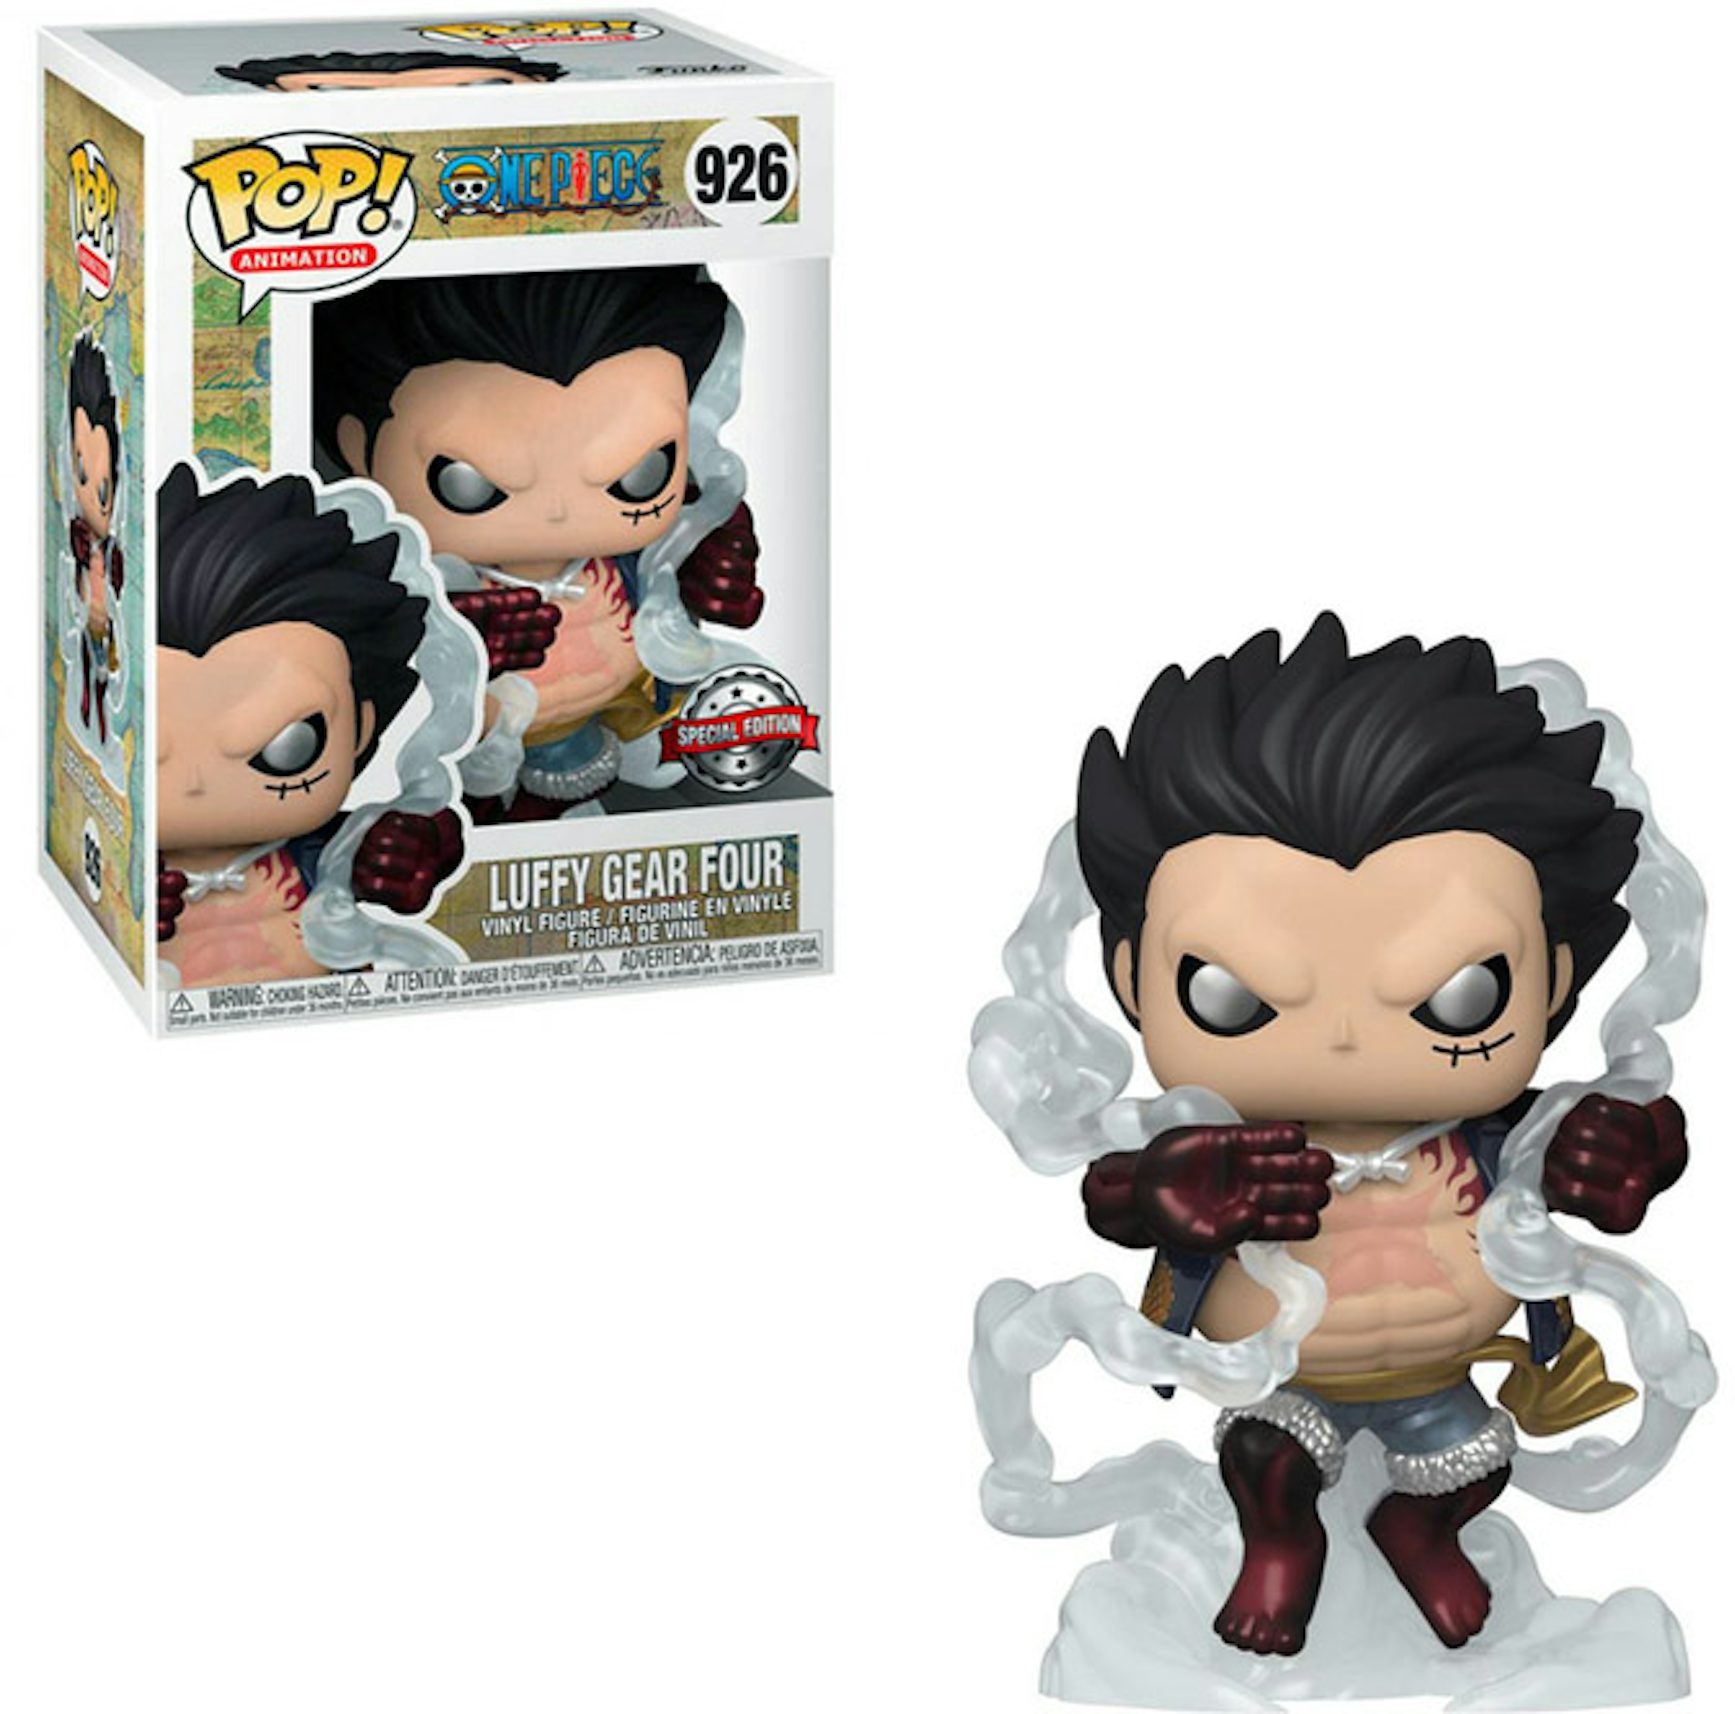 https://images.stockx.com/images/Funko-Pop-Animation-One-Piece-Luffy-Gear-Four-Special-Edition-Exclusive-Figure-926.jpg?fit=fill&bg=FFFFFF&w=1200&h=857&fm=jpg&auto=compress&dpr=2&trim=color&updated_at=1628315223&q=60